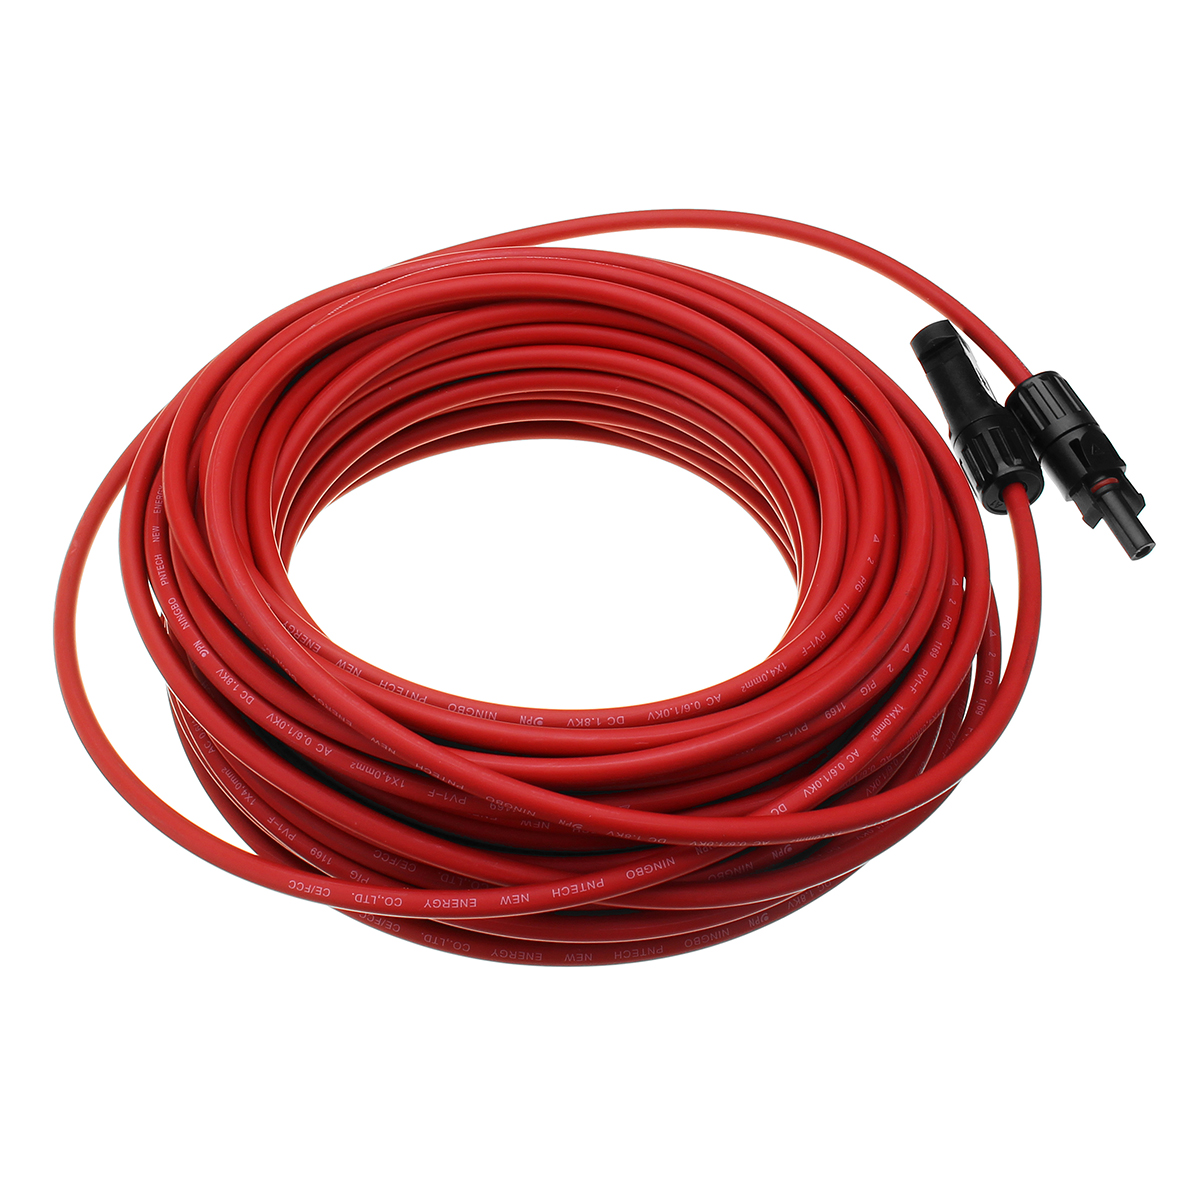 12-AWG-20-Meter-Solar-Panel-Extension-Cable-Wire-BlackRed-with-MC4-Connectors-1338749-3